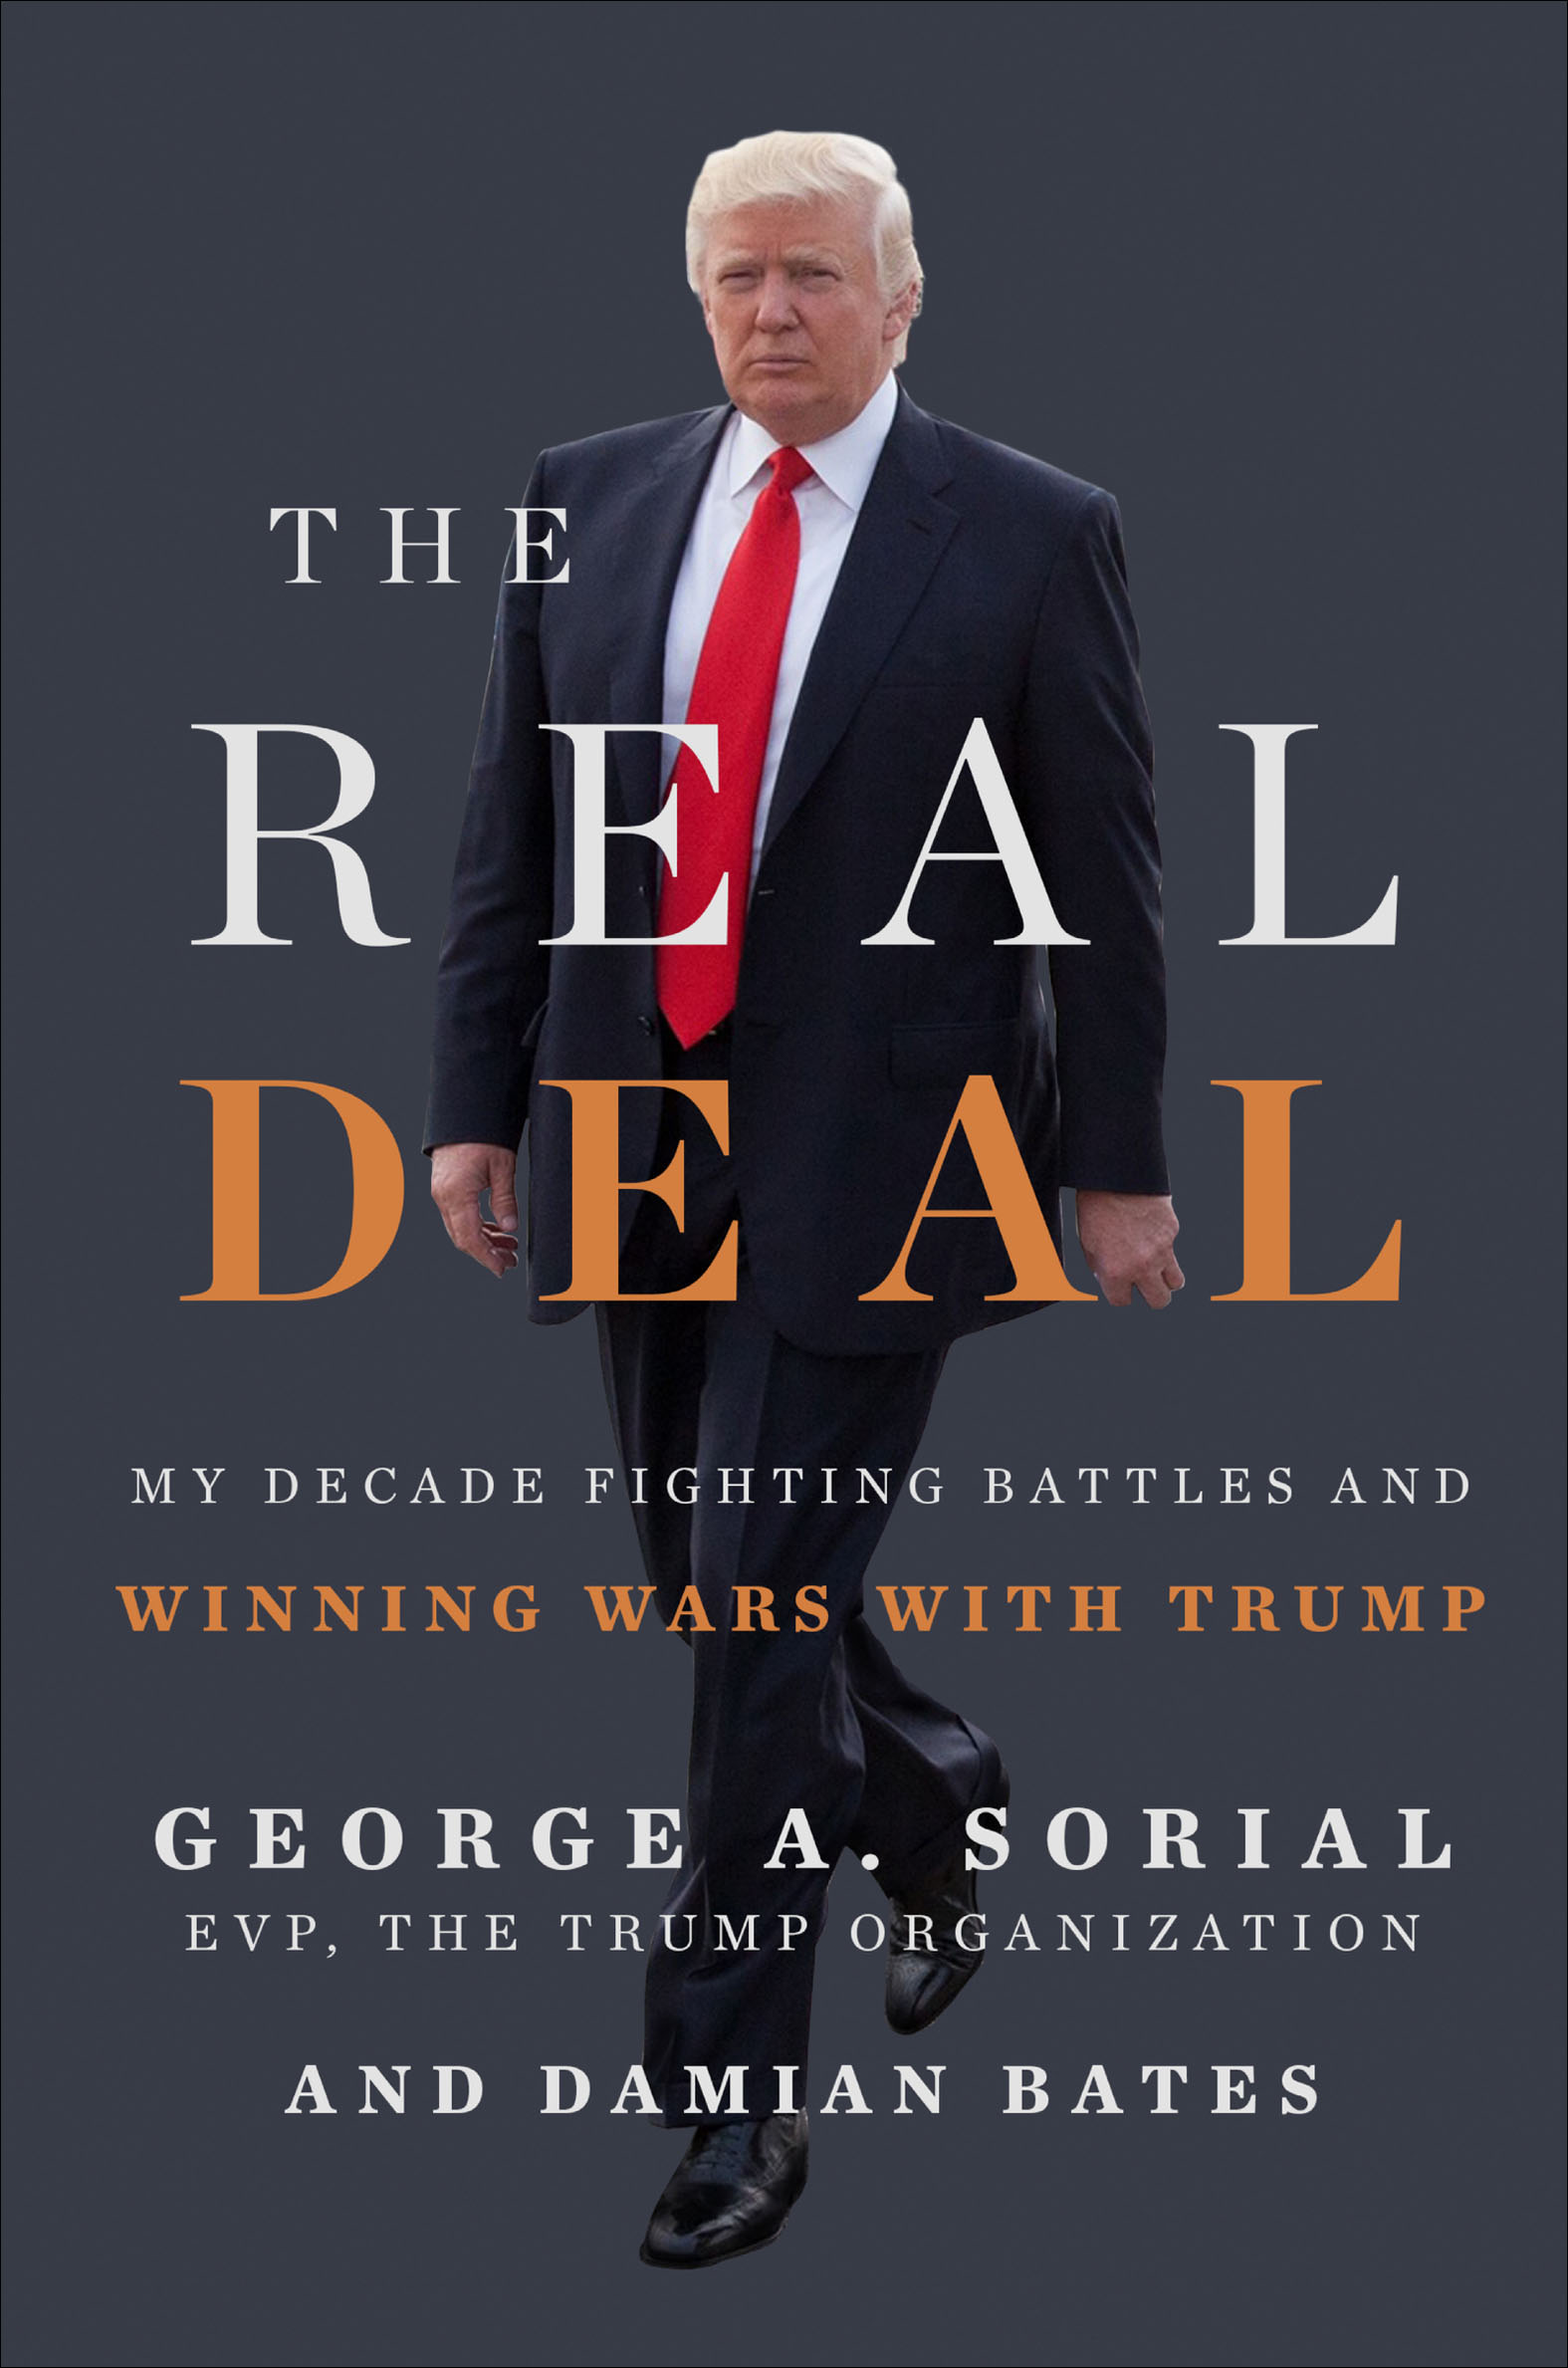 The real deal my decade fighting battles and winning wars with Trump cover image